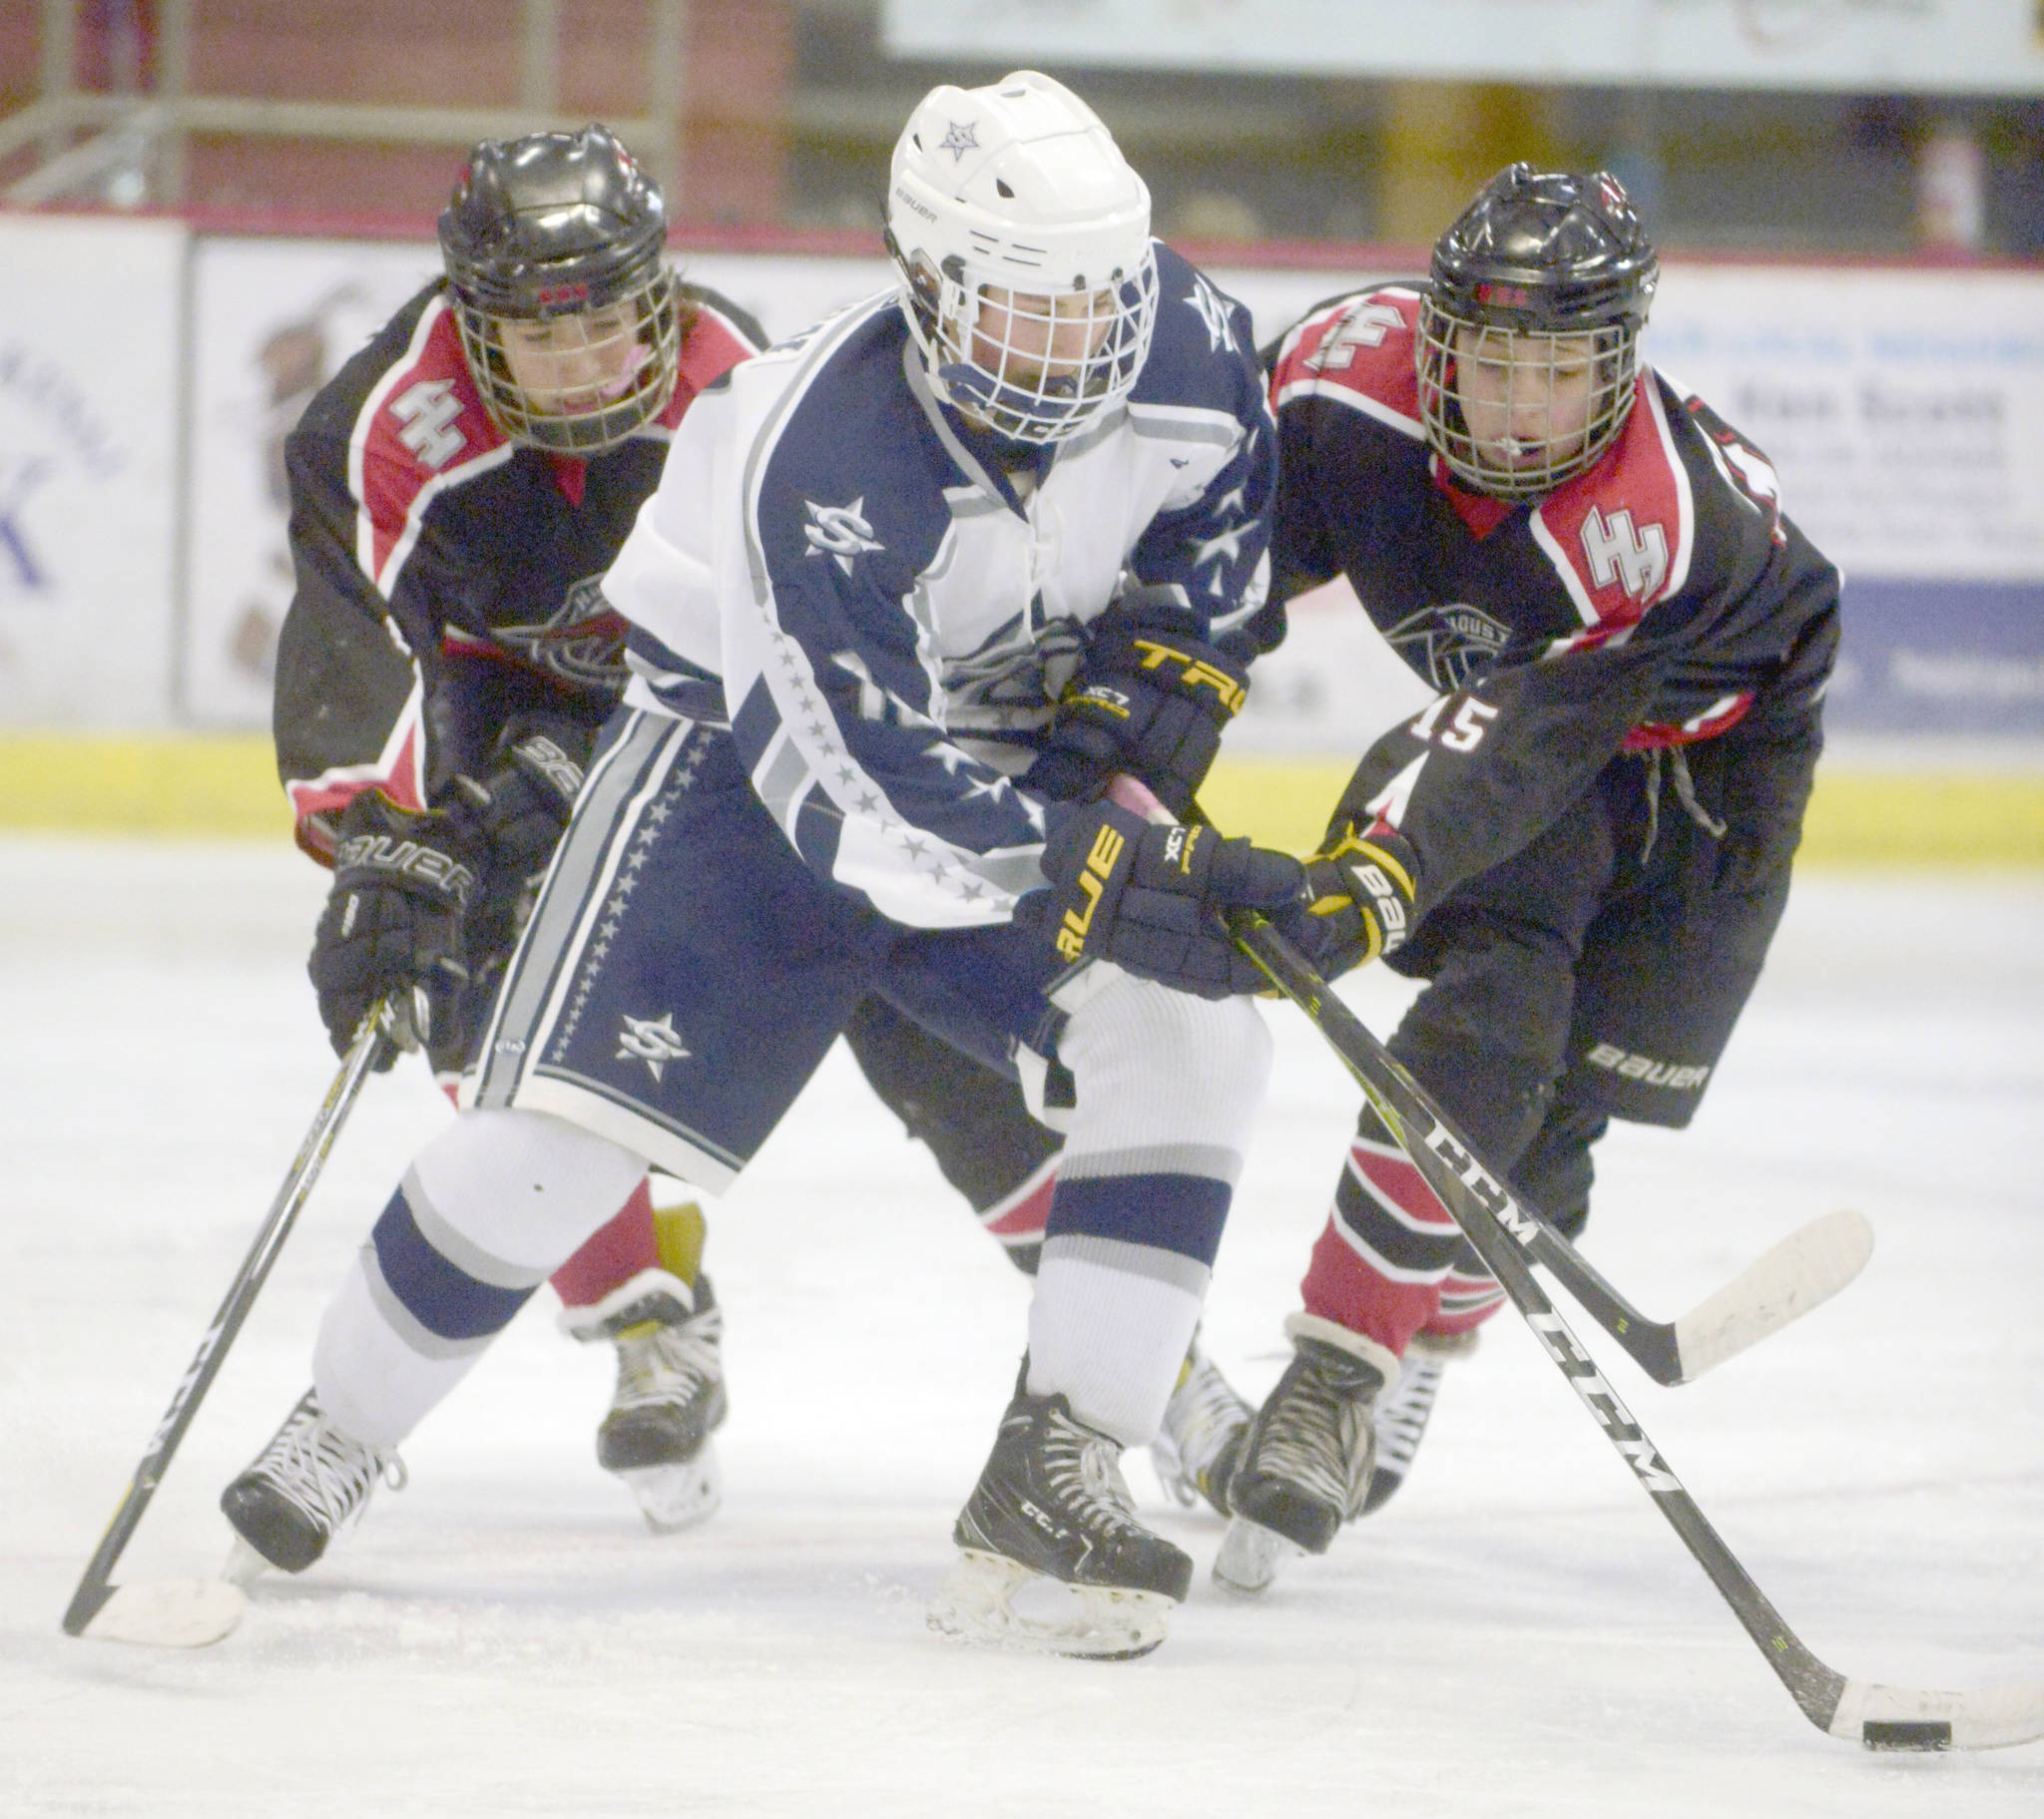 Soldotna’s Dylan Walton battles for the puck with Houston’s Isaiah Rasnake-Squires and Eric Preboski on Friday, Jan. 25, 2019, at the Soldotna Regional Sports Complex. (Photo by Jeff Helminiak/Peninsula Clarion)